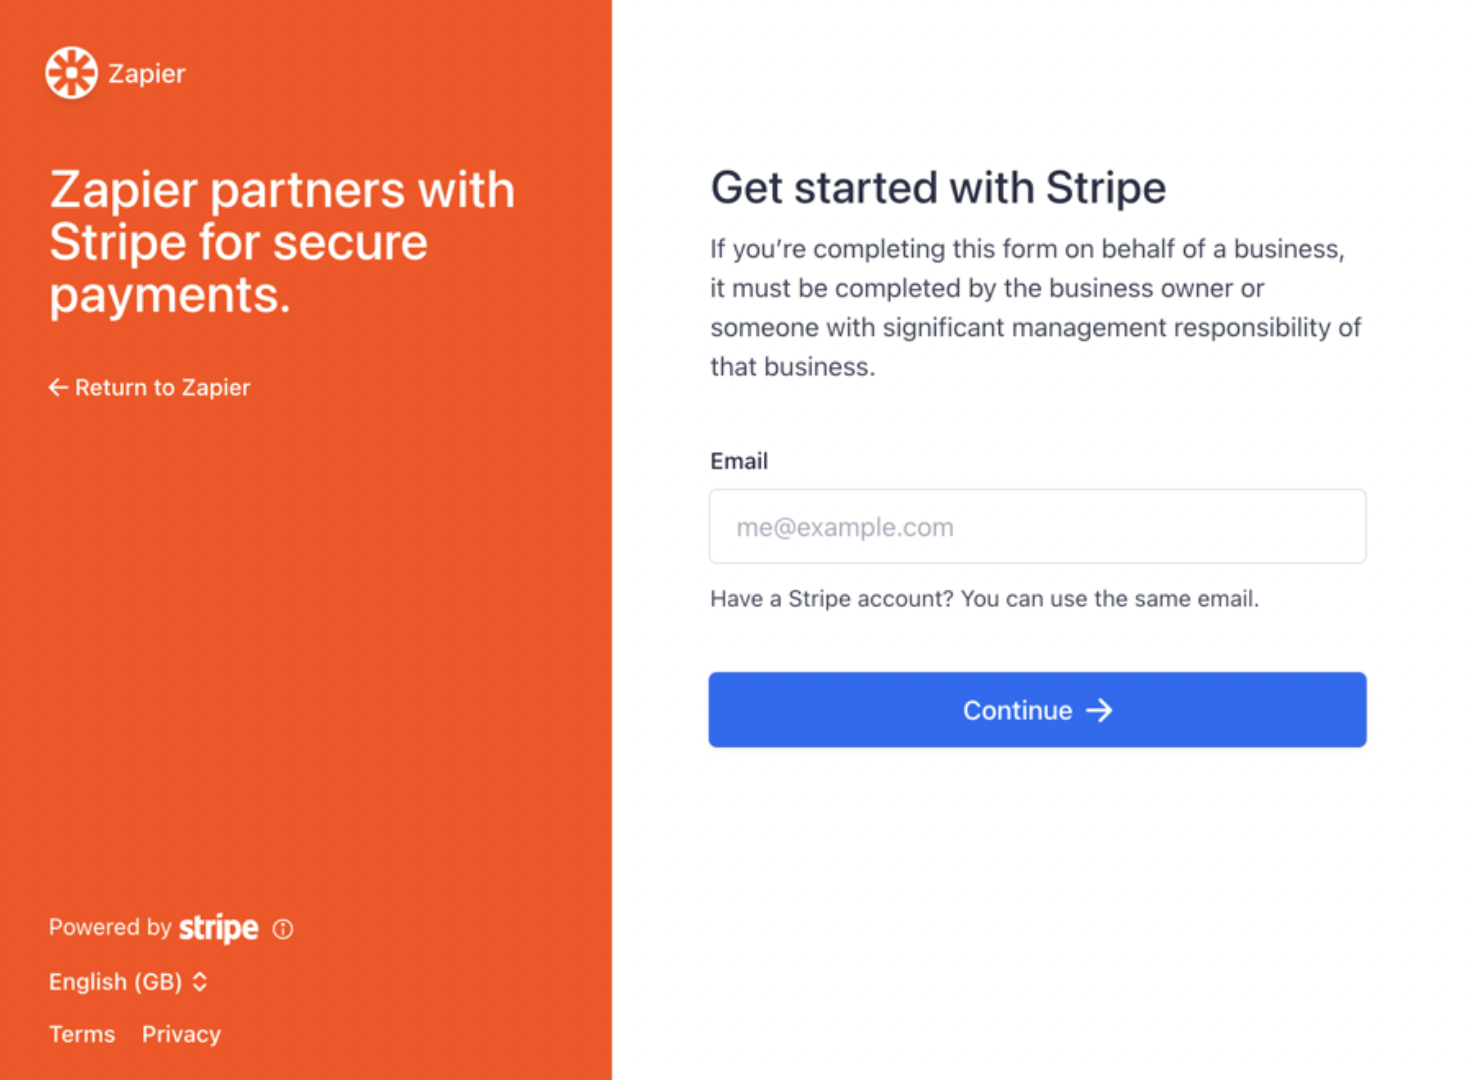 Getting started with Stripe on Zapier